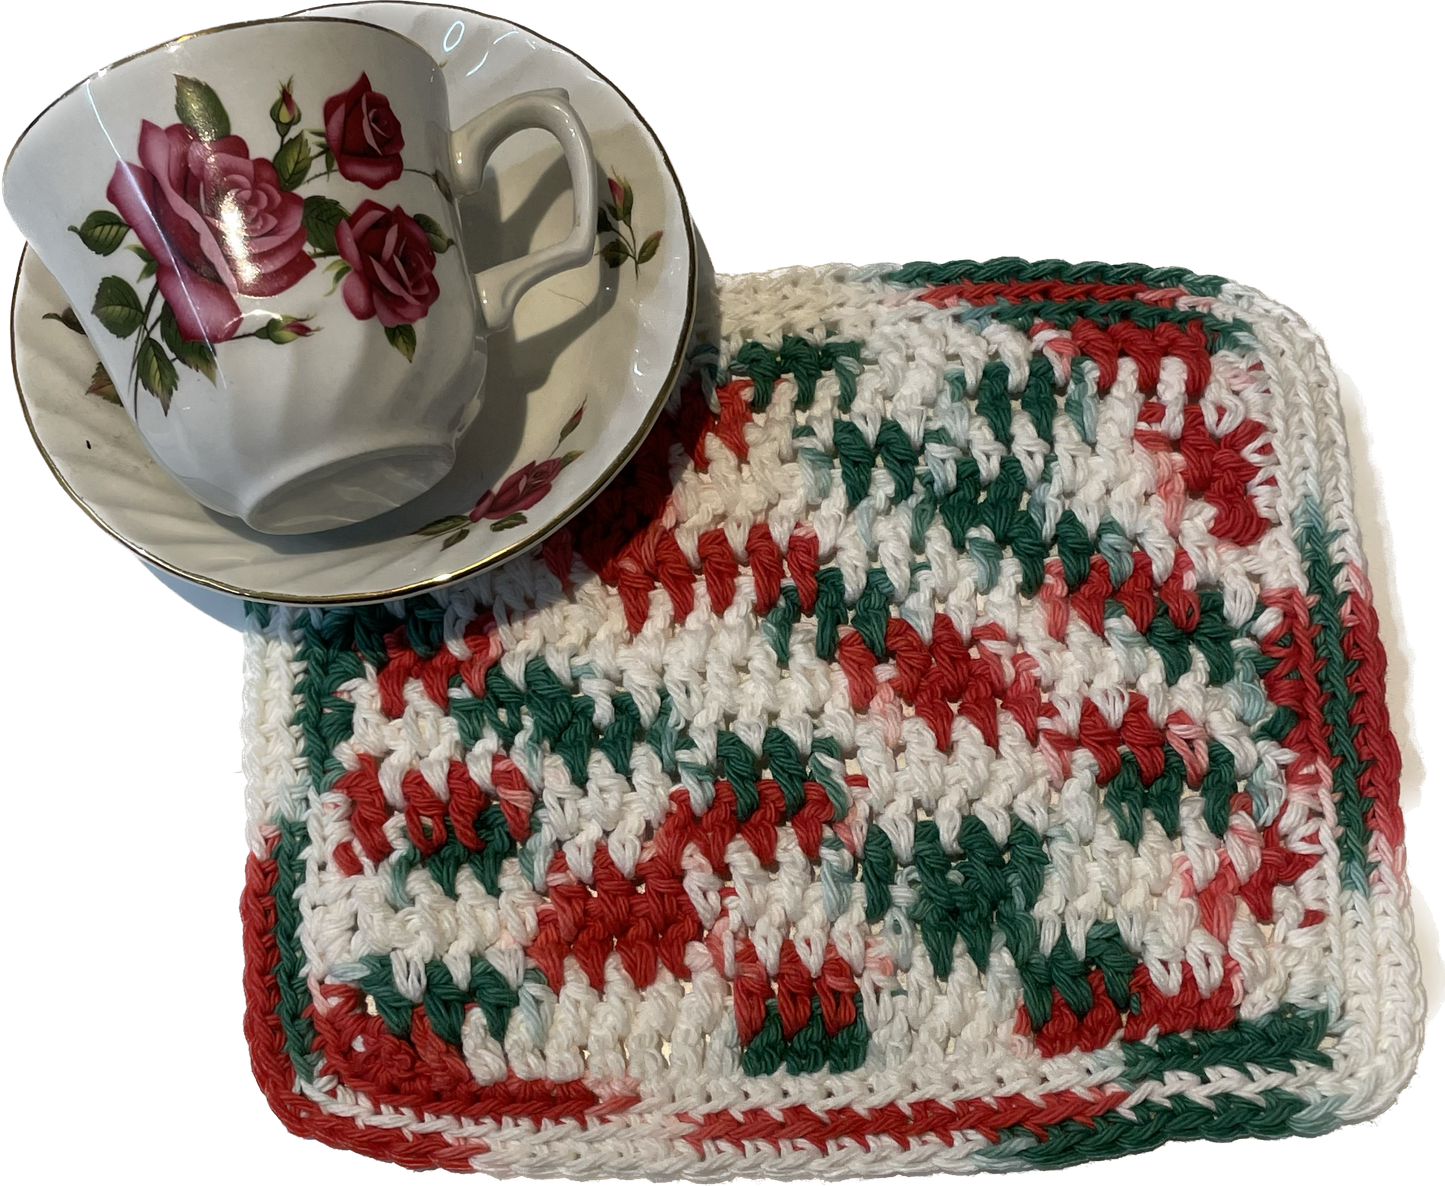 Handmade Christmas Crocheted Cotton Dish Cloth - Red, White and Green